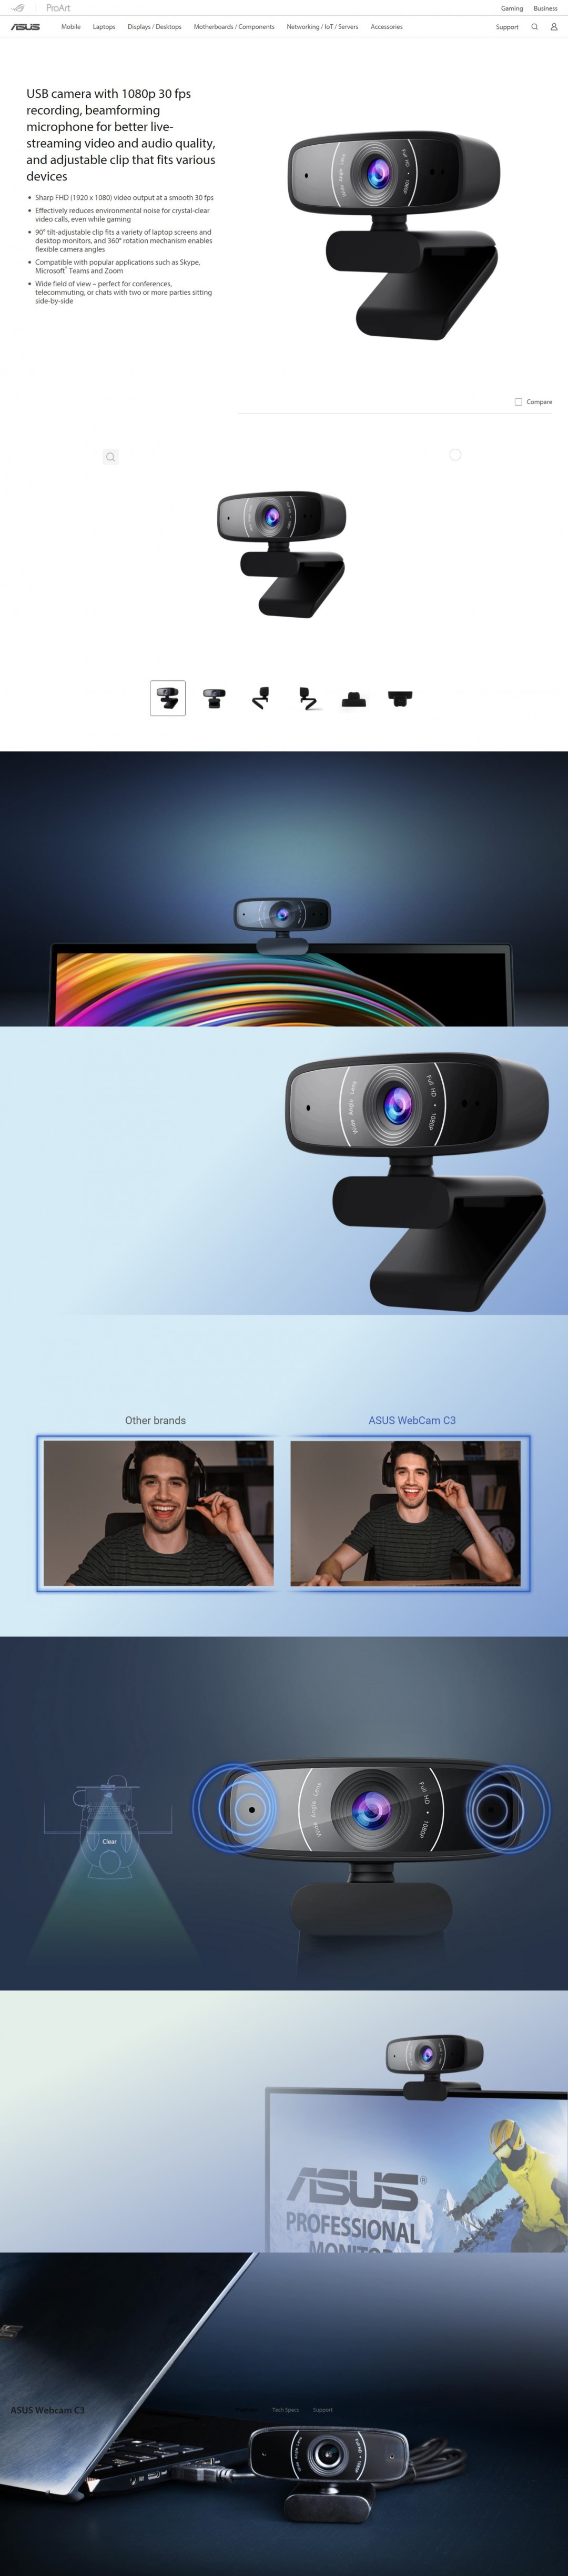  ASUS Webcam C3 USB camera with 1080p 30 fps Review